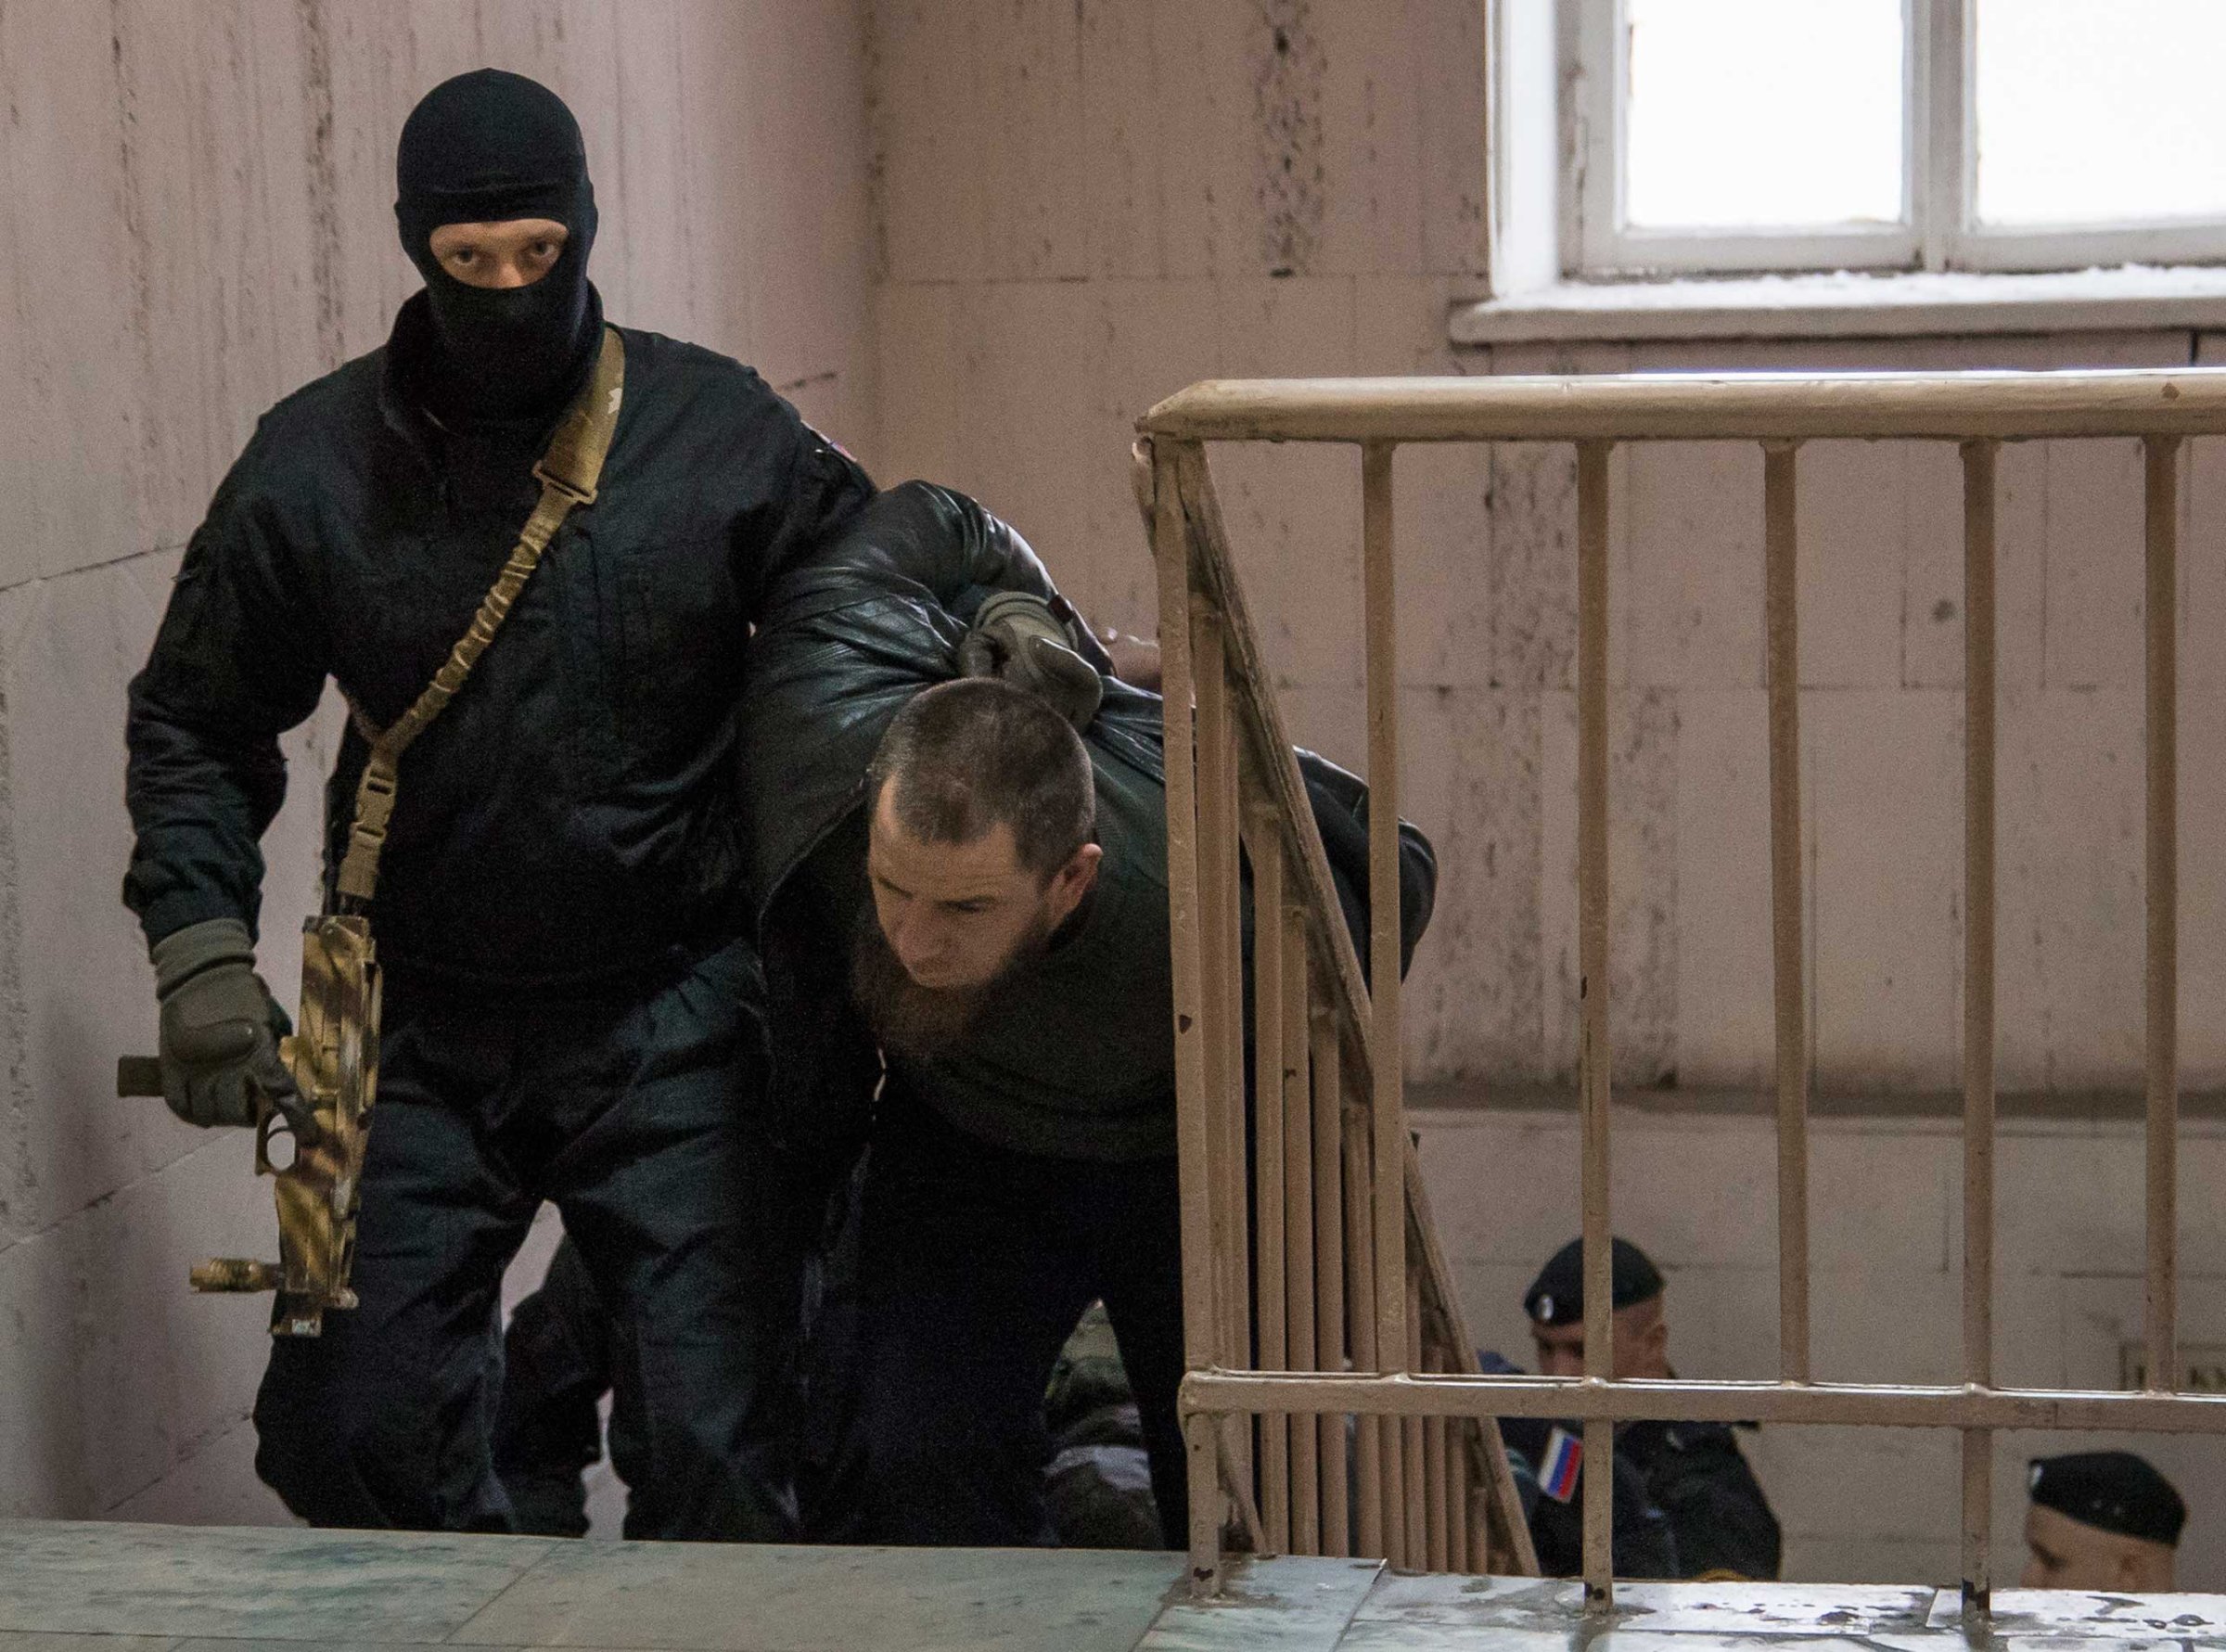 Police escort Tamerlan Eskerkhanov believed to be one of five suspects in the killing of Boris Nemtsov in a court room in Moscow, March 8, 2015.